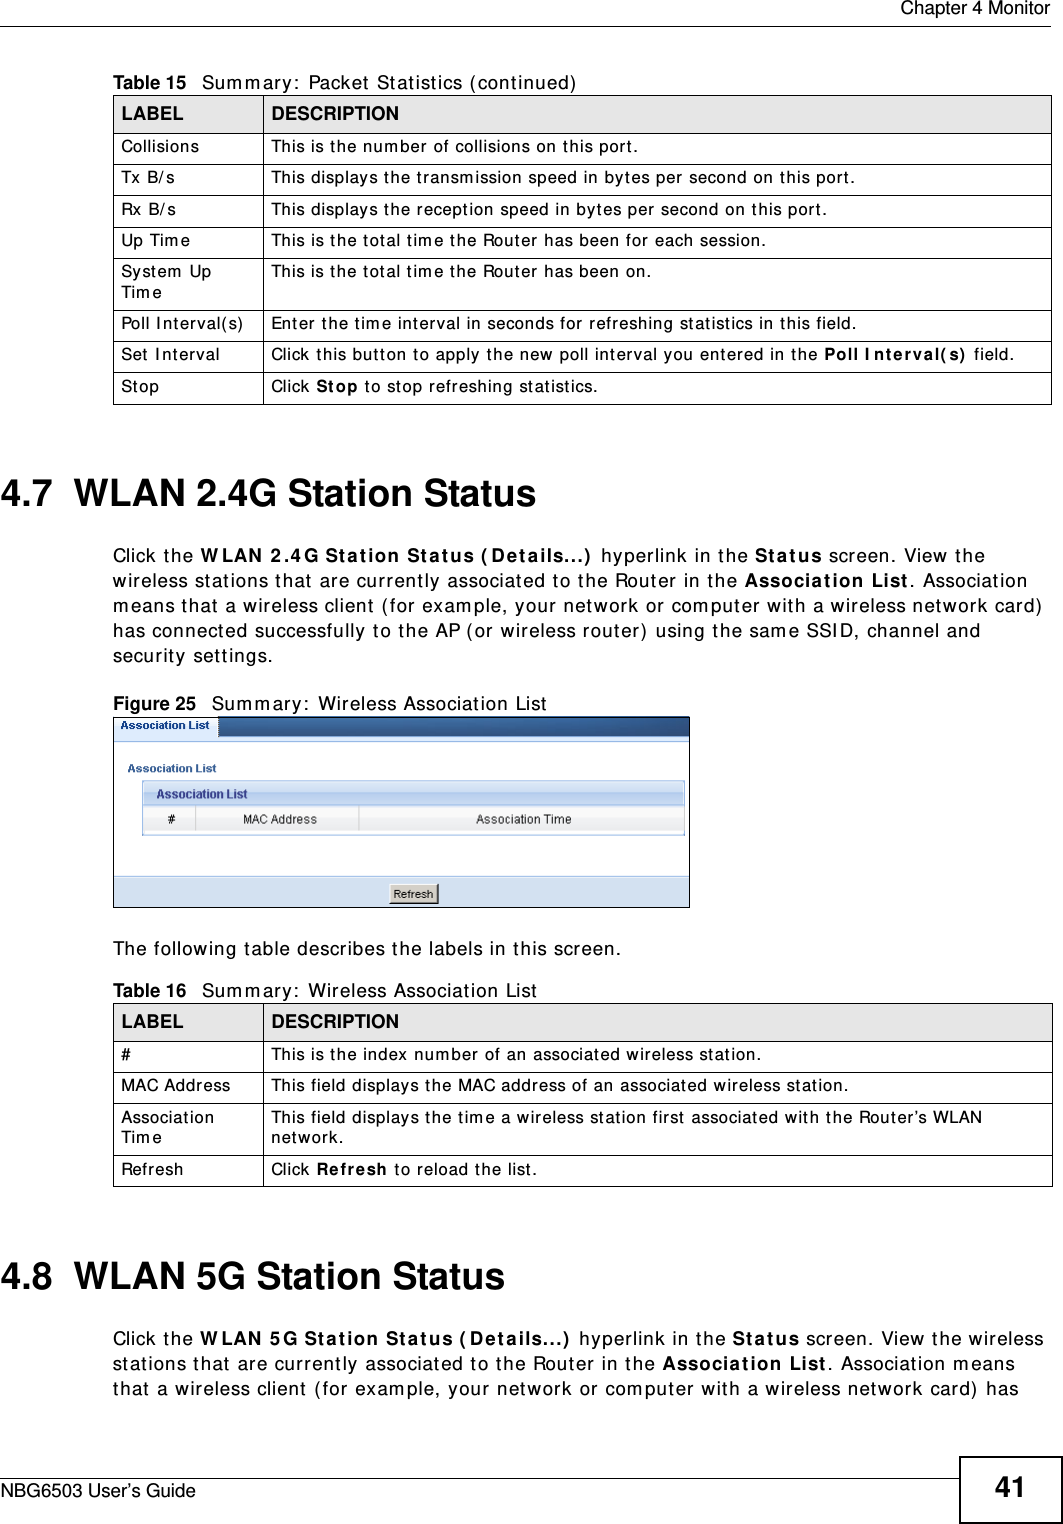  Chapter 4 MonitorNBG6503 User’s Guide 414.7  WLAN 2.4G Station Status     Click the WLAN 2.4G Station Status (Details...) hyperlink in the Status screen. View the wireless stations that are currently associated to the Router in the Association List. Association means that a wireless client (for example, your network or computer with a wireless network card) has connected successfully to the AP (or wireless router) using the same SSID, channel and security settings.Figure 25   Summary: Wireless Association ListThe following table describes the labels in this screen.4.8  WLAN 5G Station Status     Click the WLAN 5G Station Status (Details...) hyperlink in the Status screen. View the wireless stations that are currently associated to the Router in the Association List. Association means that a wireless client (for example, your network or computer with a wireless network card) has Collisions  This is the number of collisions on this port.Tx B/s  This displays the transmission speed in bytes per second on this port.Rx B/s This displays the reception speed in bytes per second on this port.Up Time This is the total time the Router has been for each session.System Up Time This is the total time the Router has been on.Poll Interval(s) Enter the time interval in seconds for refreshing statistics in this field.Set Interval Click this button to apply the new poll interval you entered in the Poll Interval(s) field.Stop Click Stop to stop refreshing statistics.Table 15   Summary: Packet Statistics (continued)LABEL DESCRIPTIONTable 16   Summary: Wireless Association ListLABEL DESCRIPTION#  This is the index number of an associated wireless station. MAC Address  This field displays the MAC address of an associated wireless station.Association Time This field displays the time a wireless station first associated with the Router’s WLAN network.Refresh Click Refresh to reload the list. 